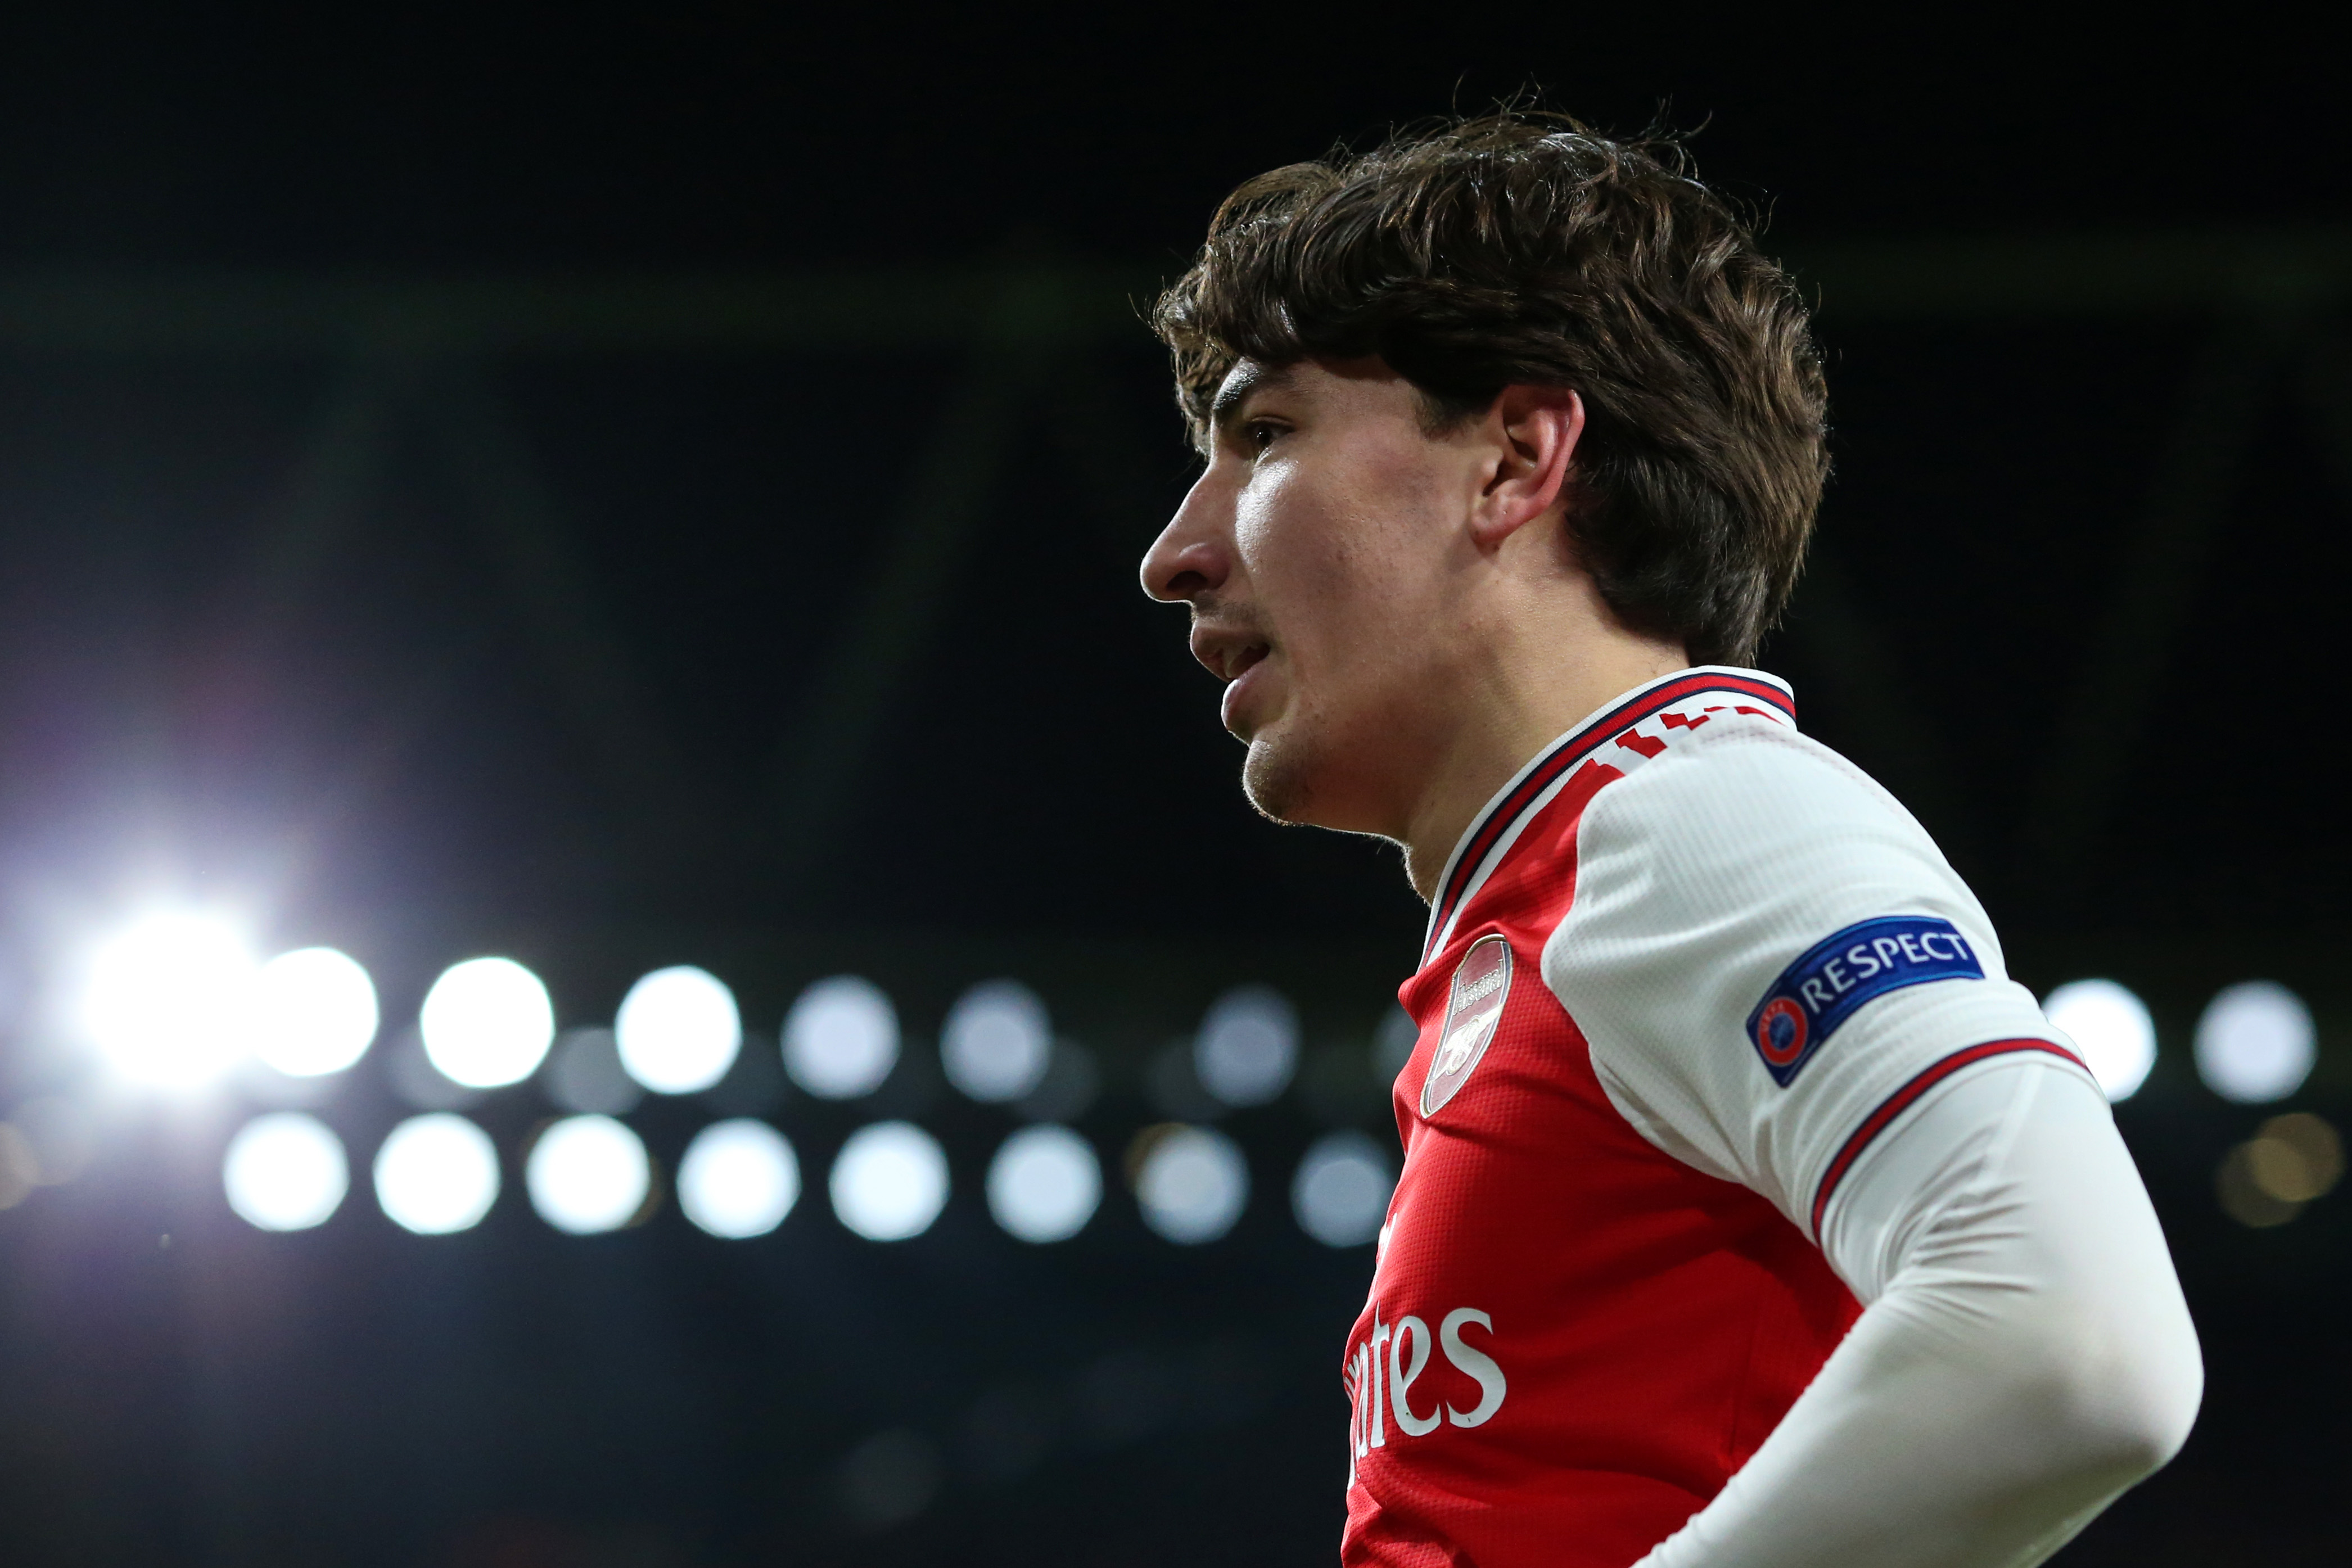 Arsenal: Hector Bellerin's Unseen Journey - review by Ciaran McLoughlin